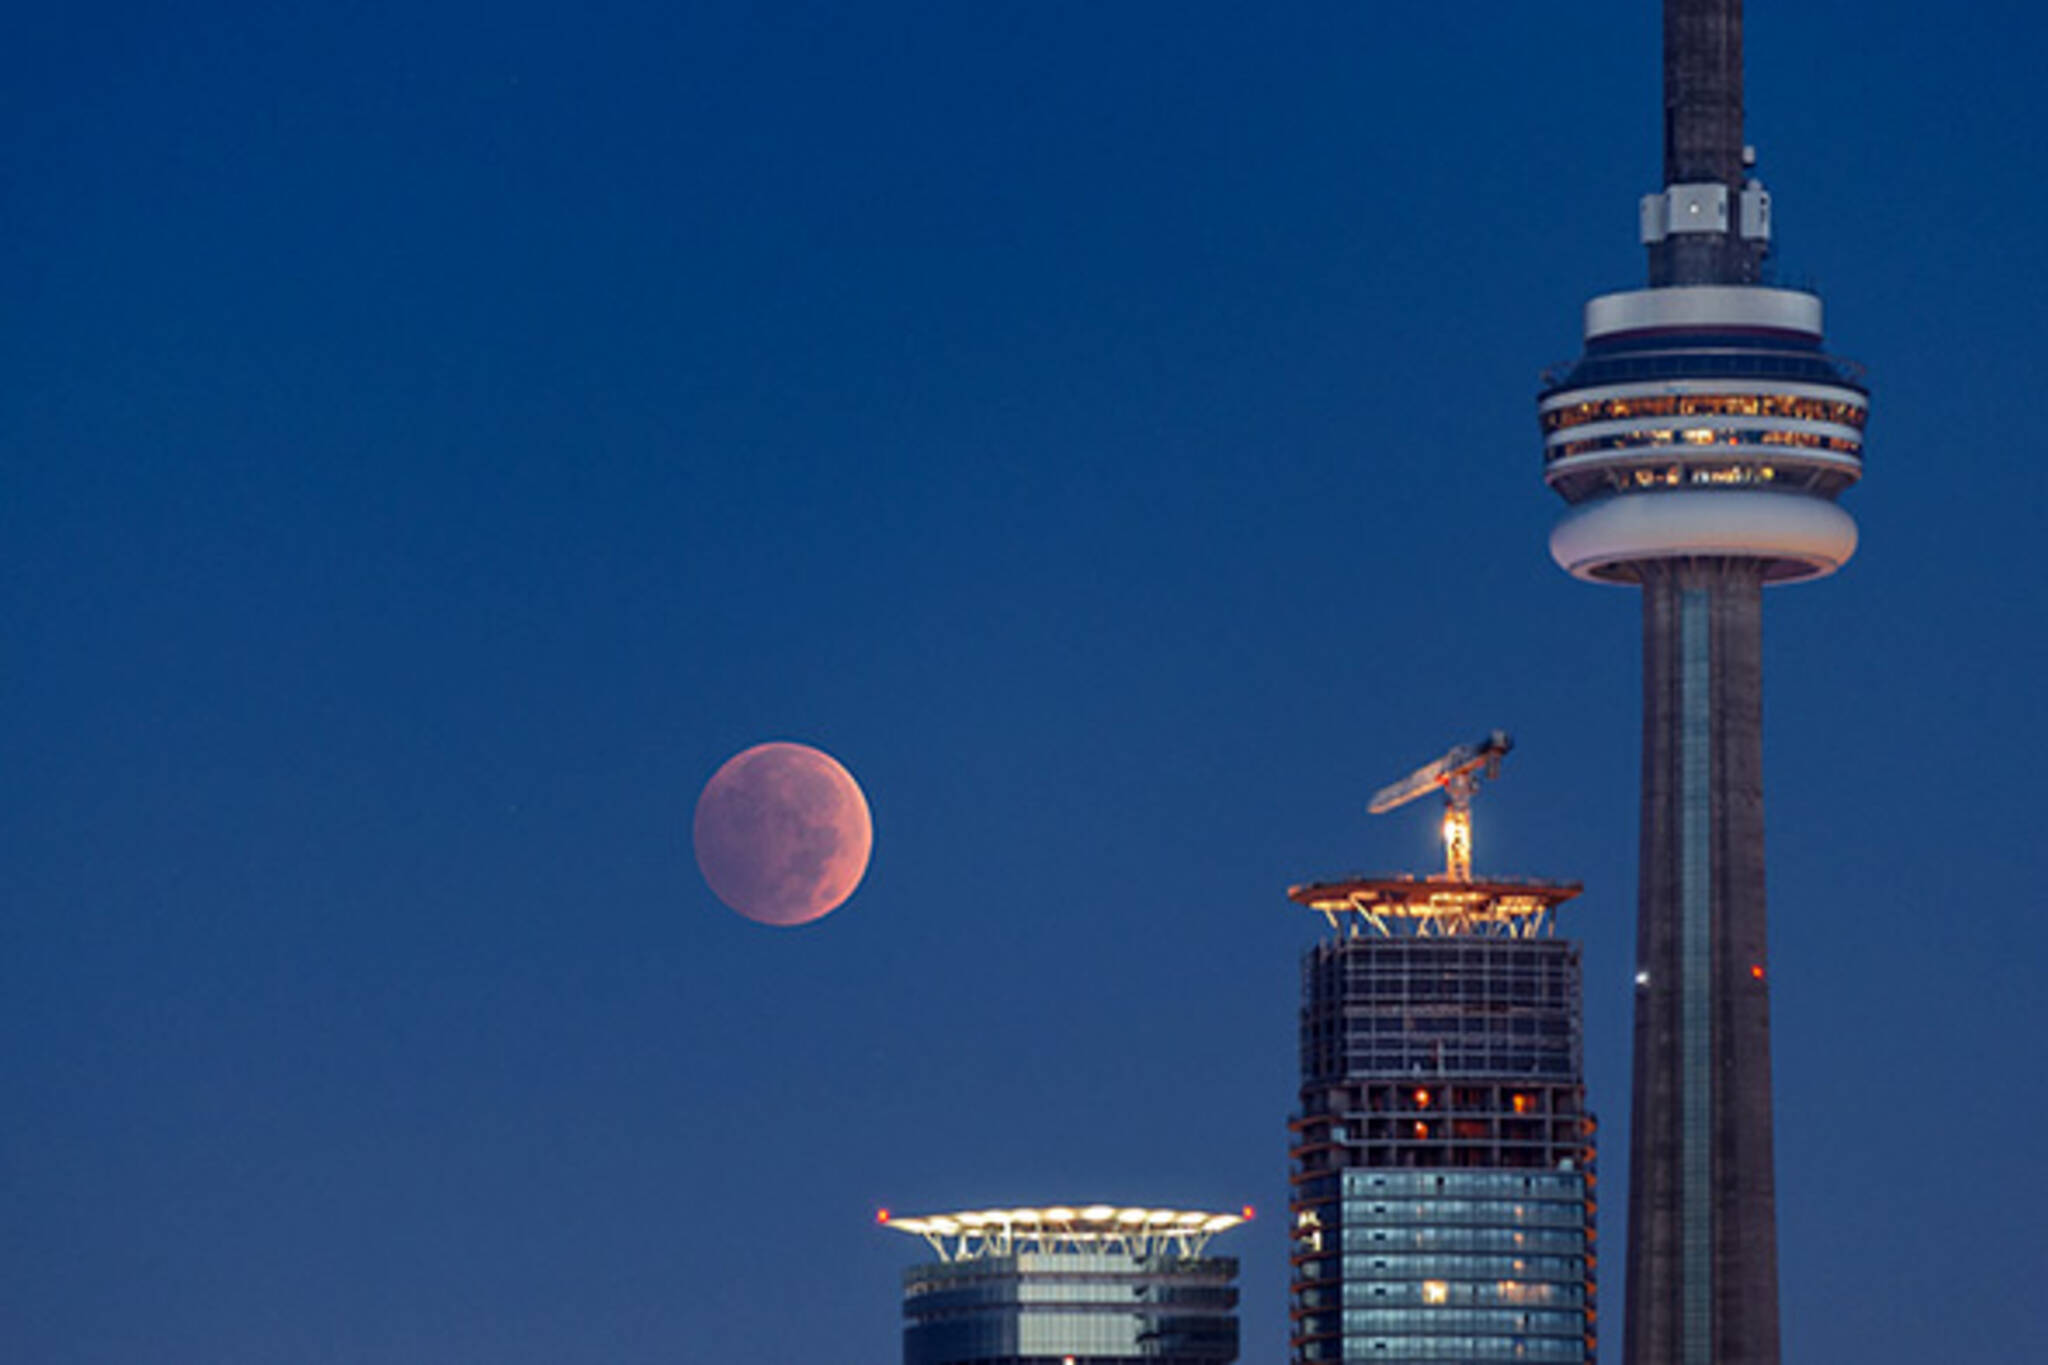 Where to watch the supermoon lunar eclipse in Toronto